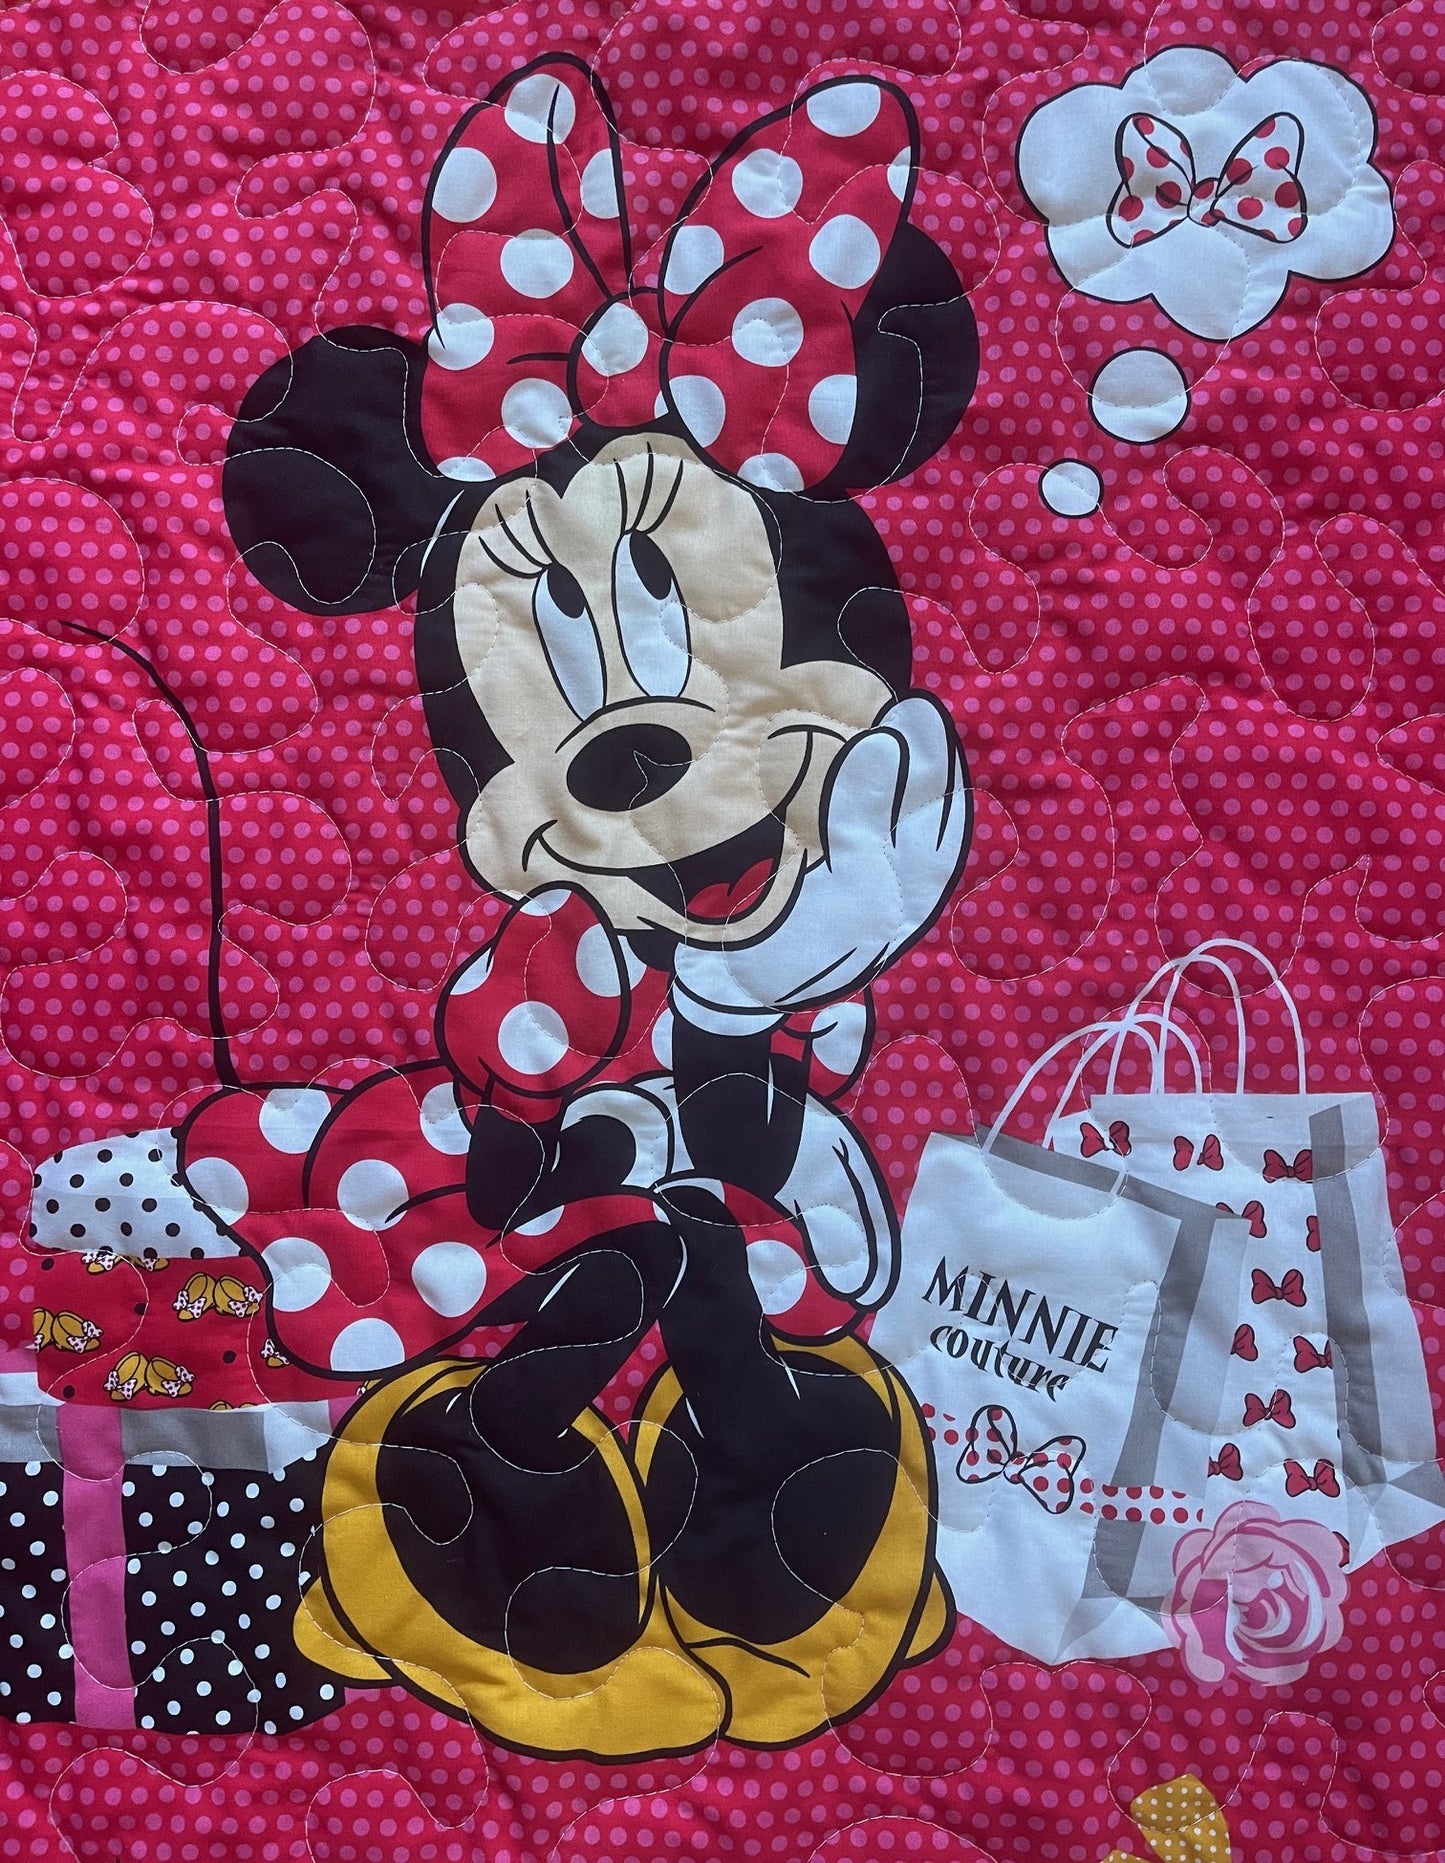 MINNIE MOUSE "MINNIE COUTURE" Inspired Quilted Blanket with Soft Flannel Backing Fabric